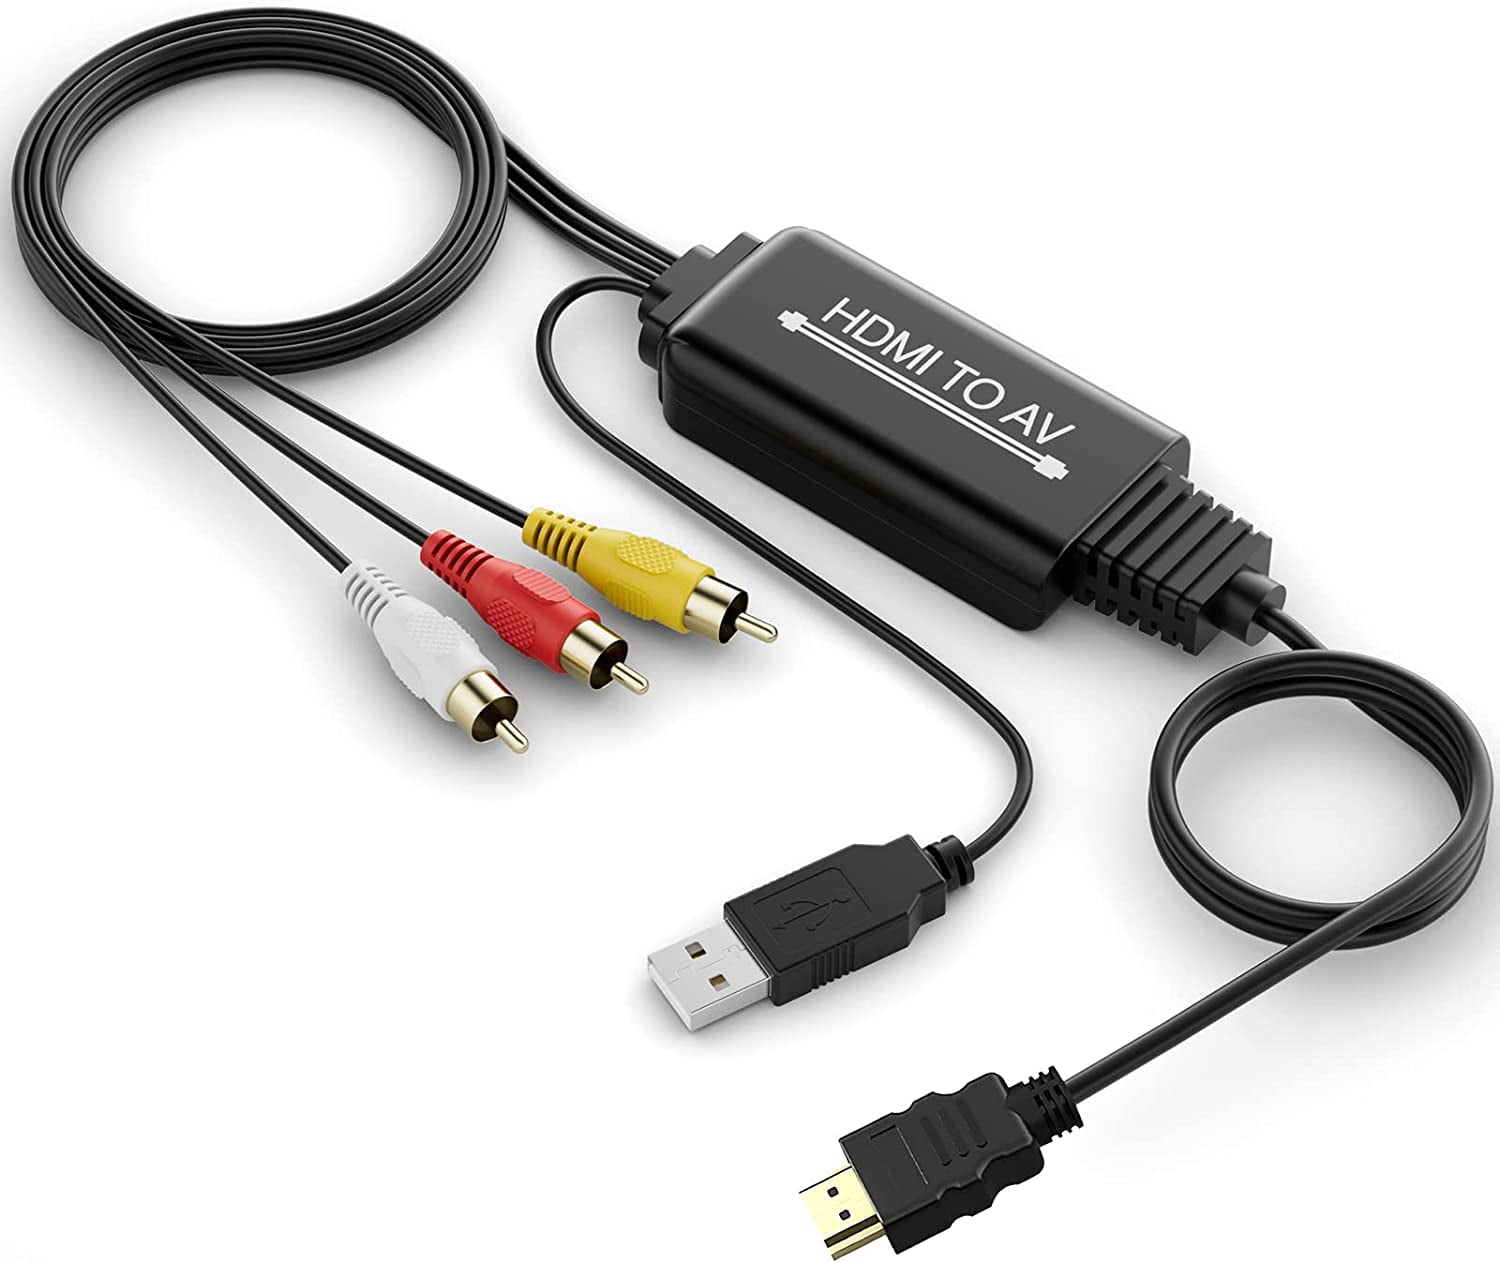 DIGITNOW HDMI to RCA Converter, HDMI to RCA Cable 1080P HDMI to AV 3RCA CVBs Composite Video Audio Supports for PC, HDTV, DVD, VHC VCR - Walmart.com